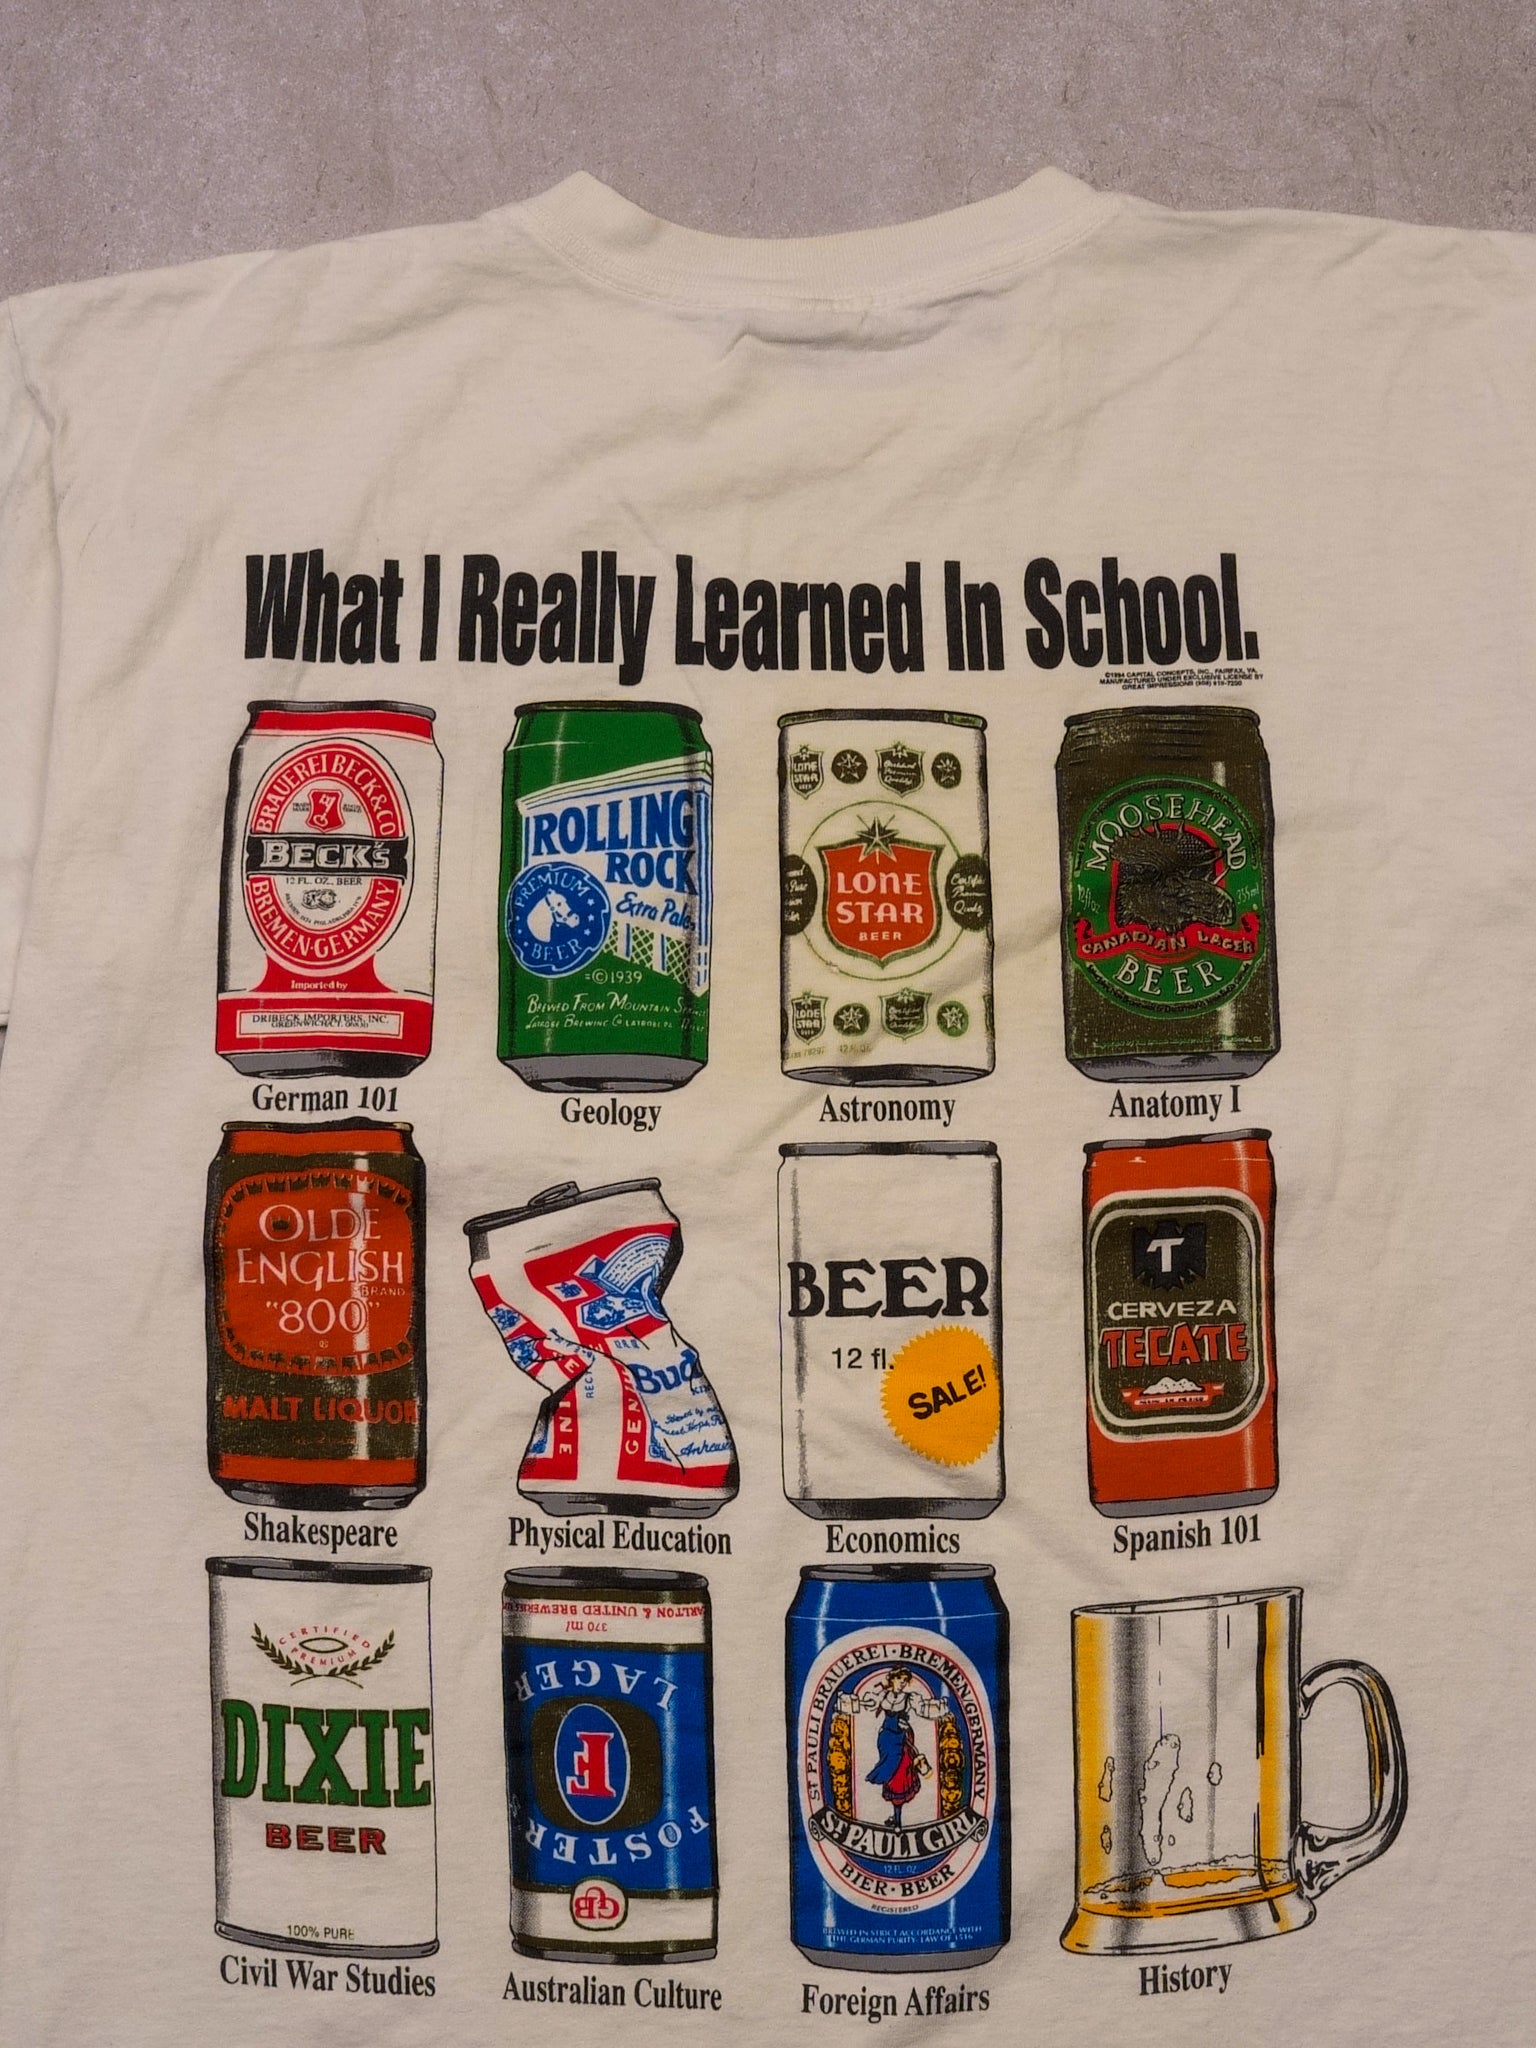 Vintage 90s "White What I Really Learned In School" Beer Tee (M/L)